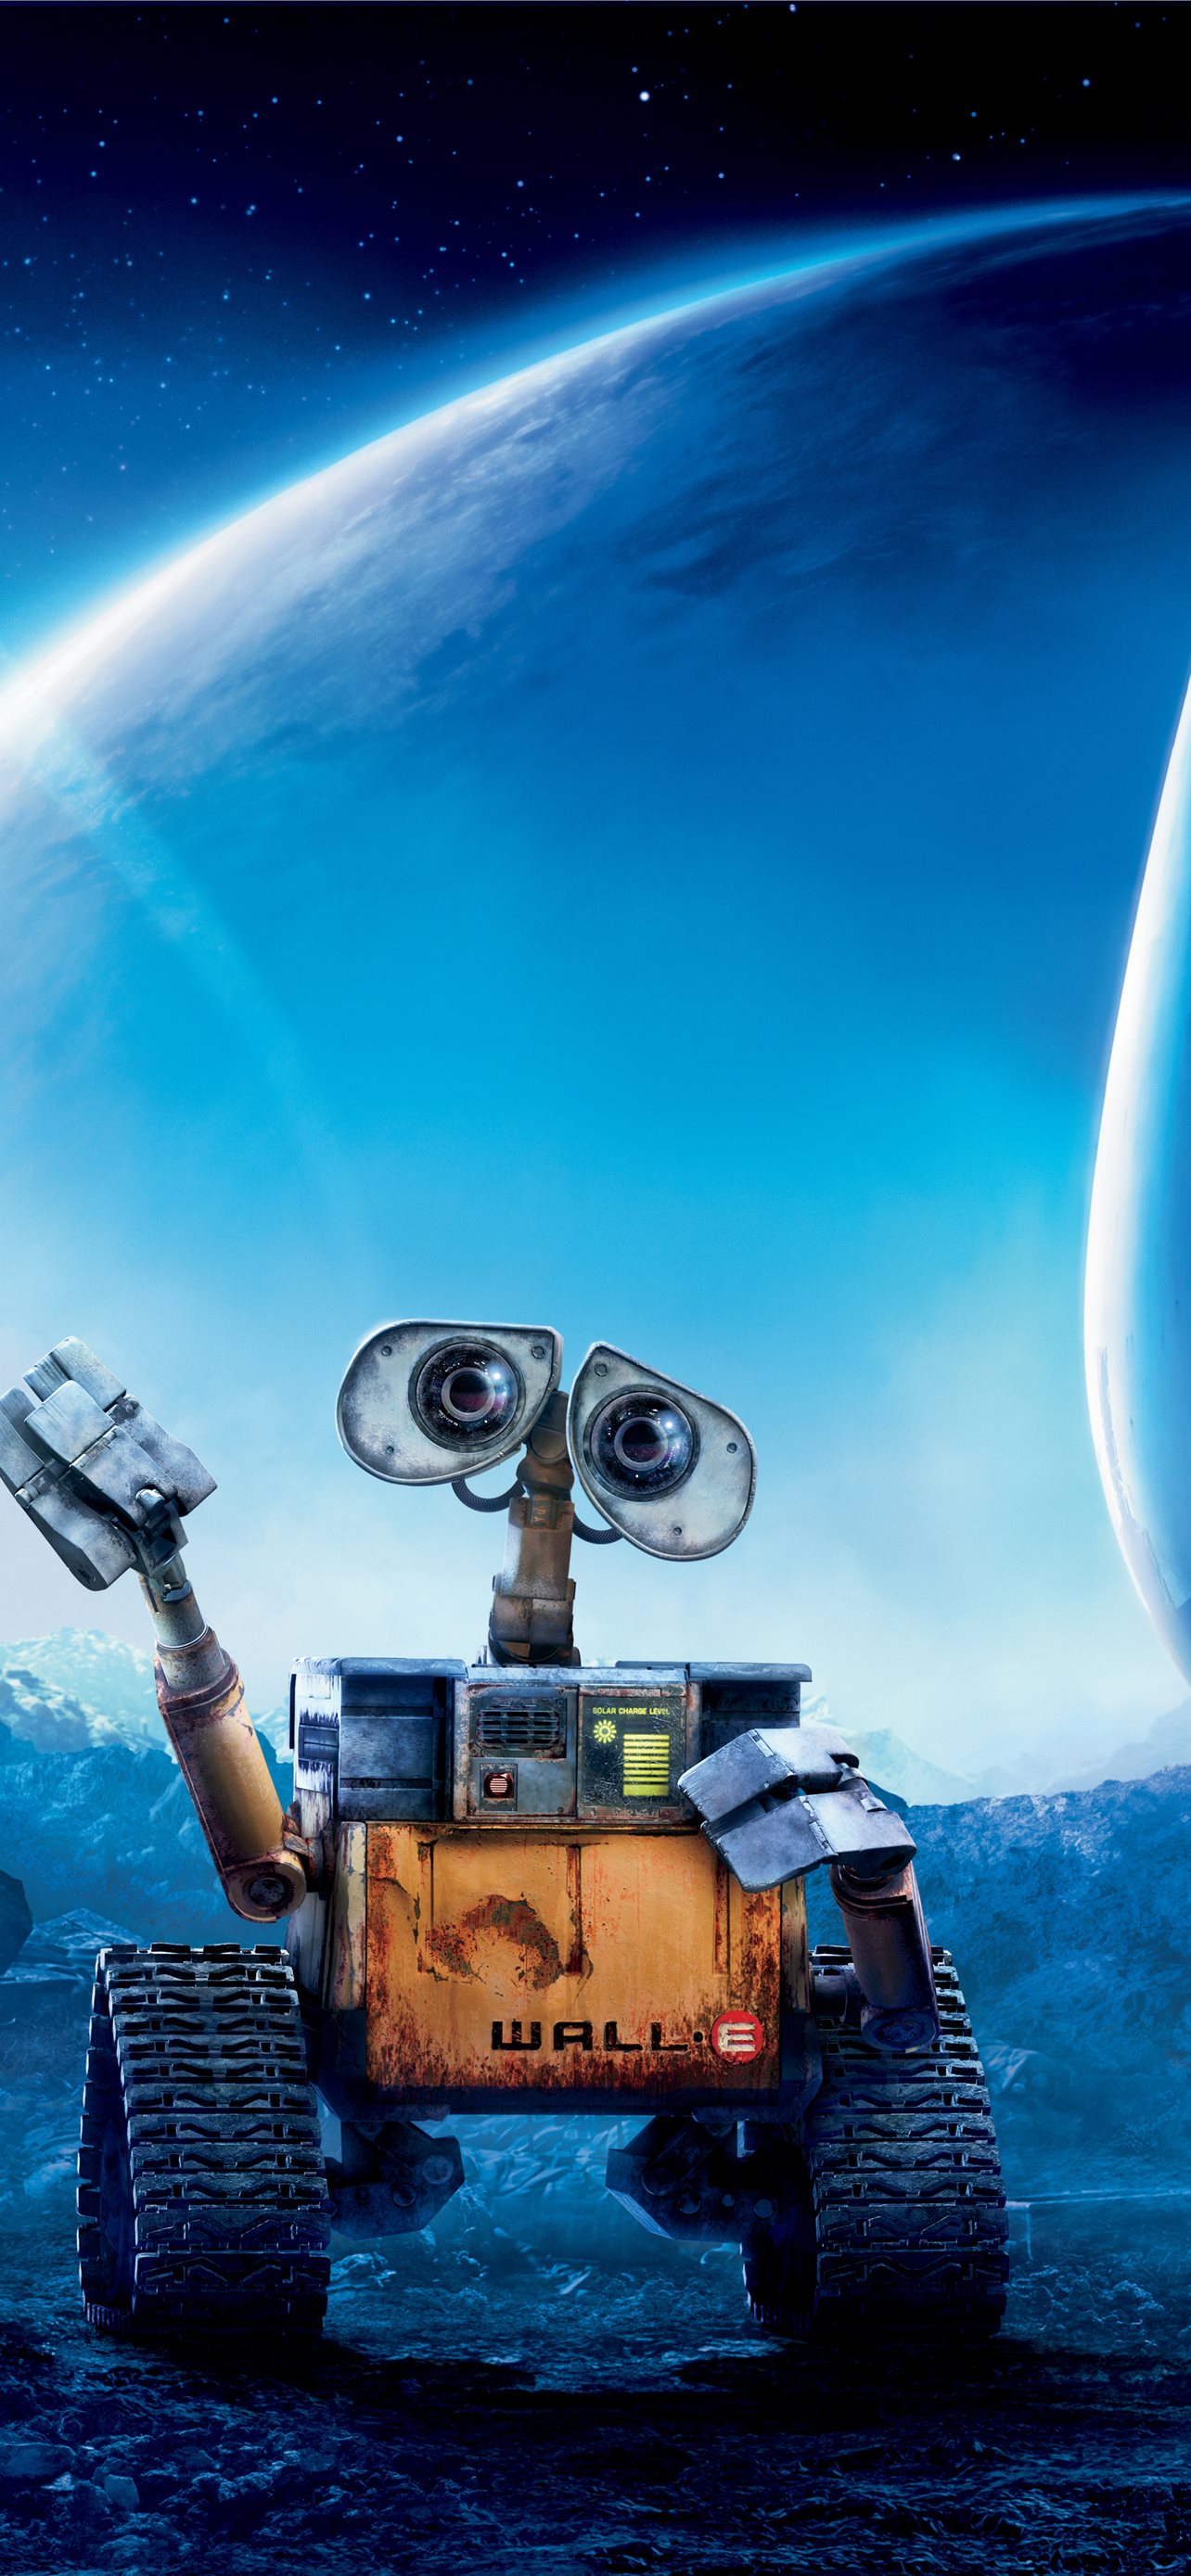 Wall E 5k Sony Xperia X XZ Z5 Premium HD 4k Images... iPhone Wallpapers  Free Download